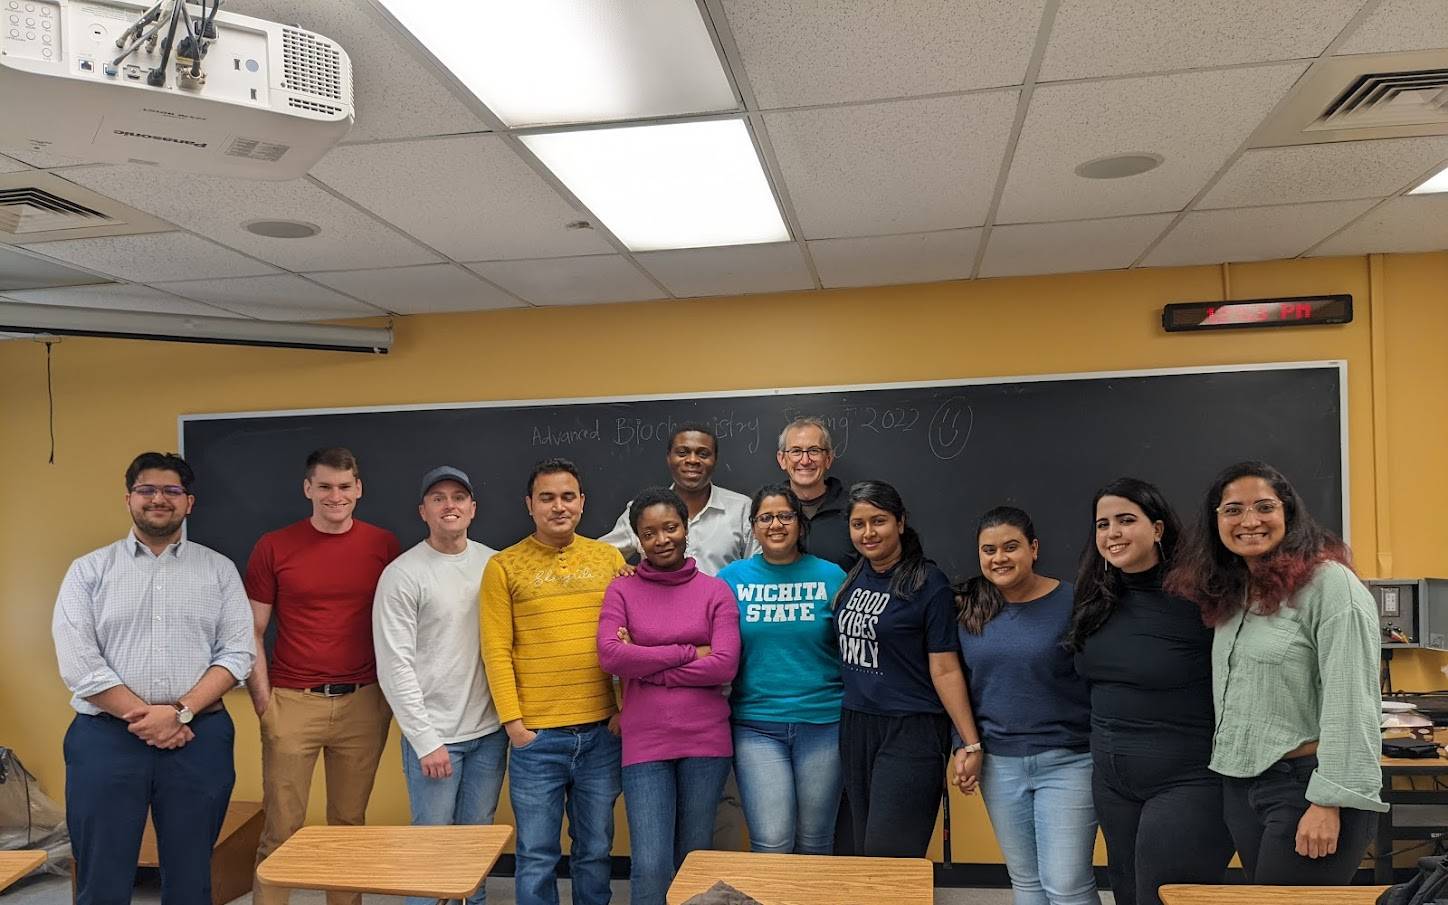 Gradudate students and Prof. Jim Bann posing for a picture in front of a blackboard